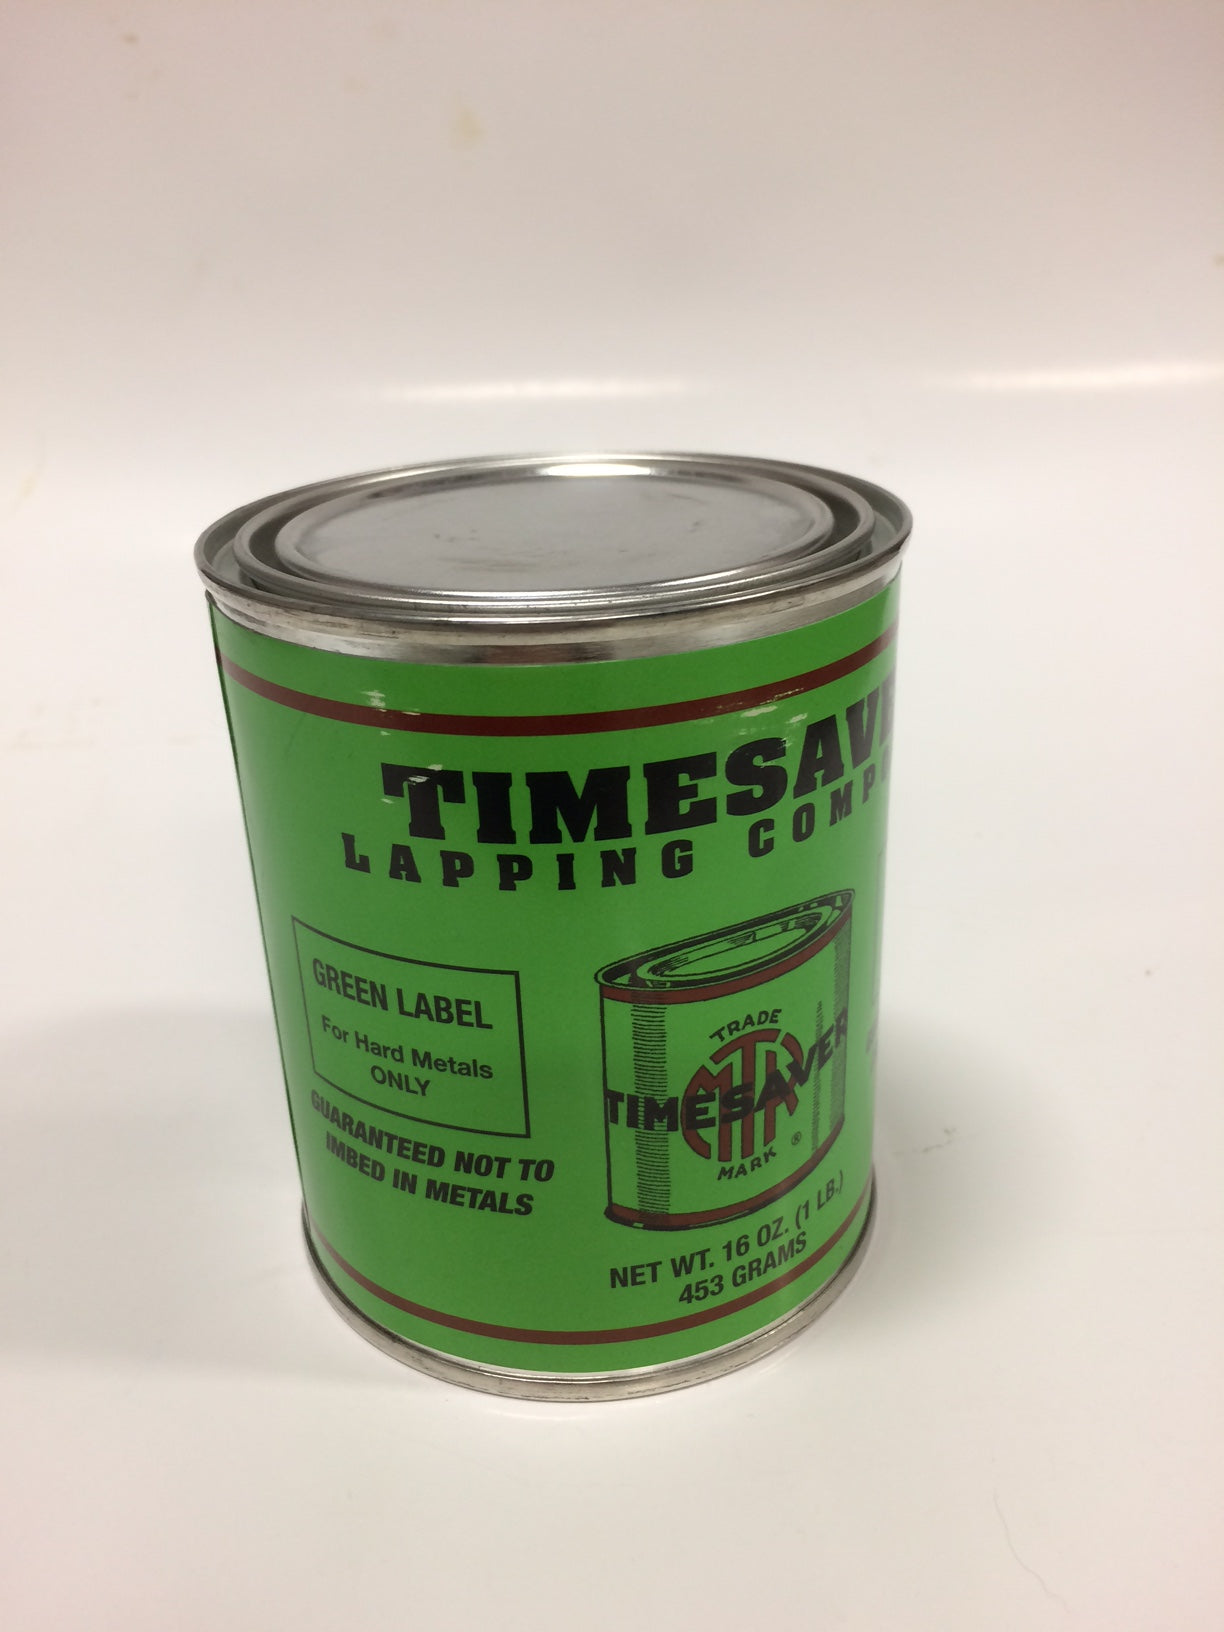 Timesaver 1 lb Green Label Lapping Compounds – NEWMAN TOOLS